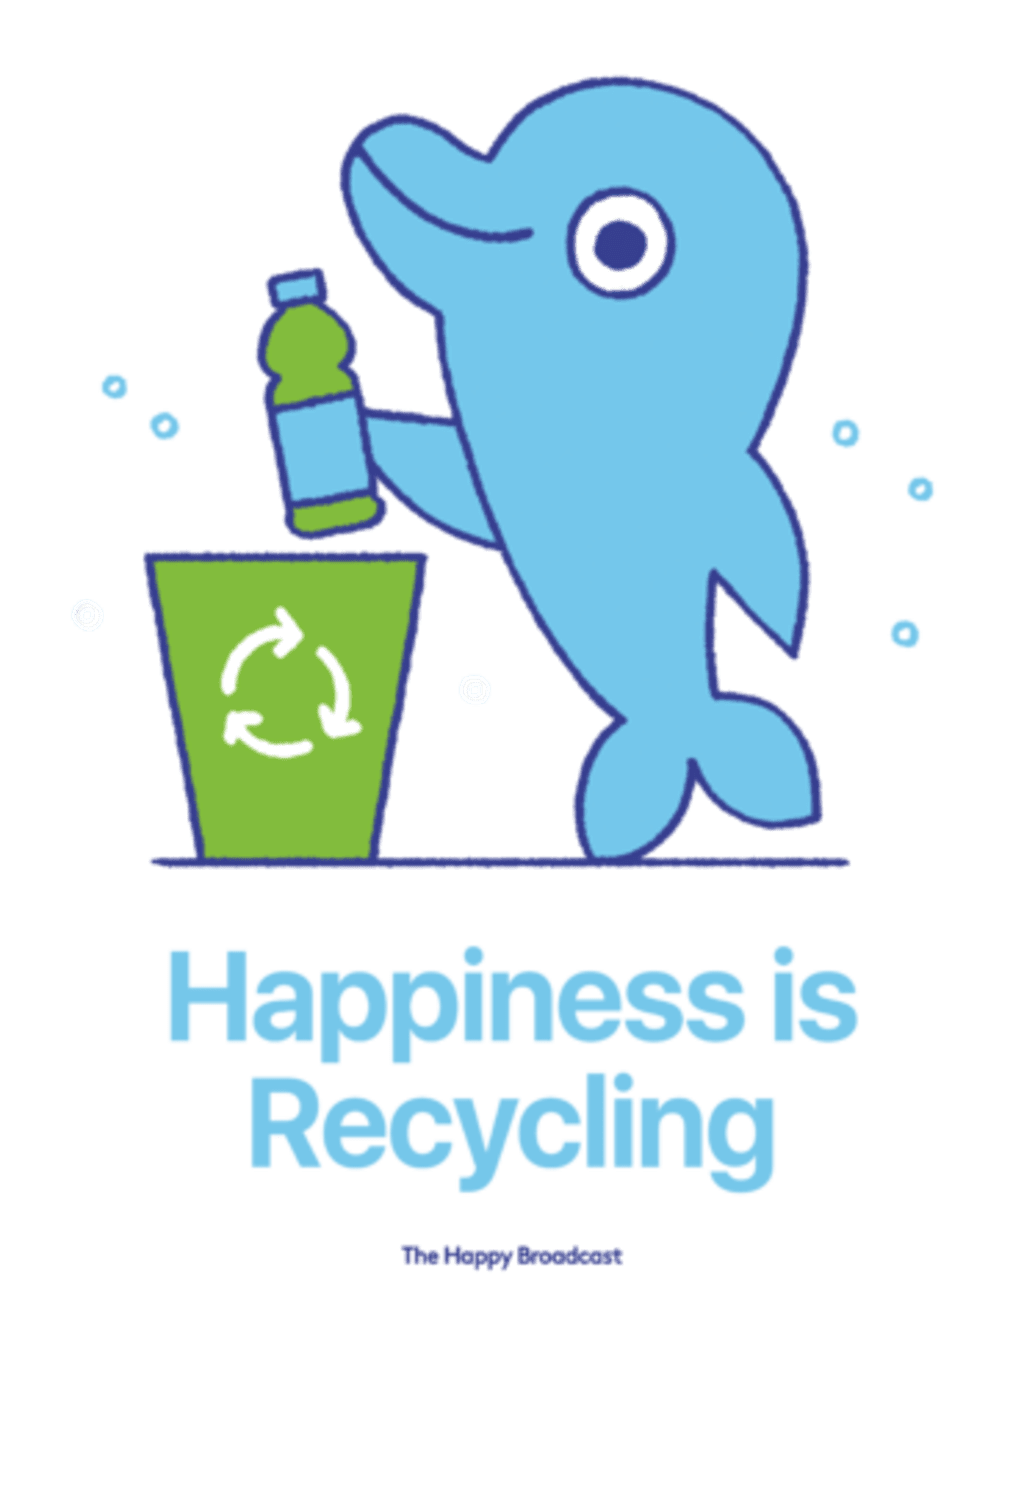 Happiness is recycling